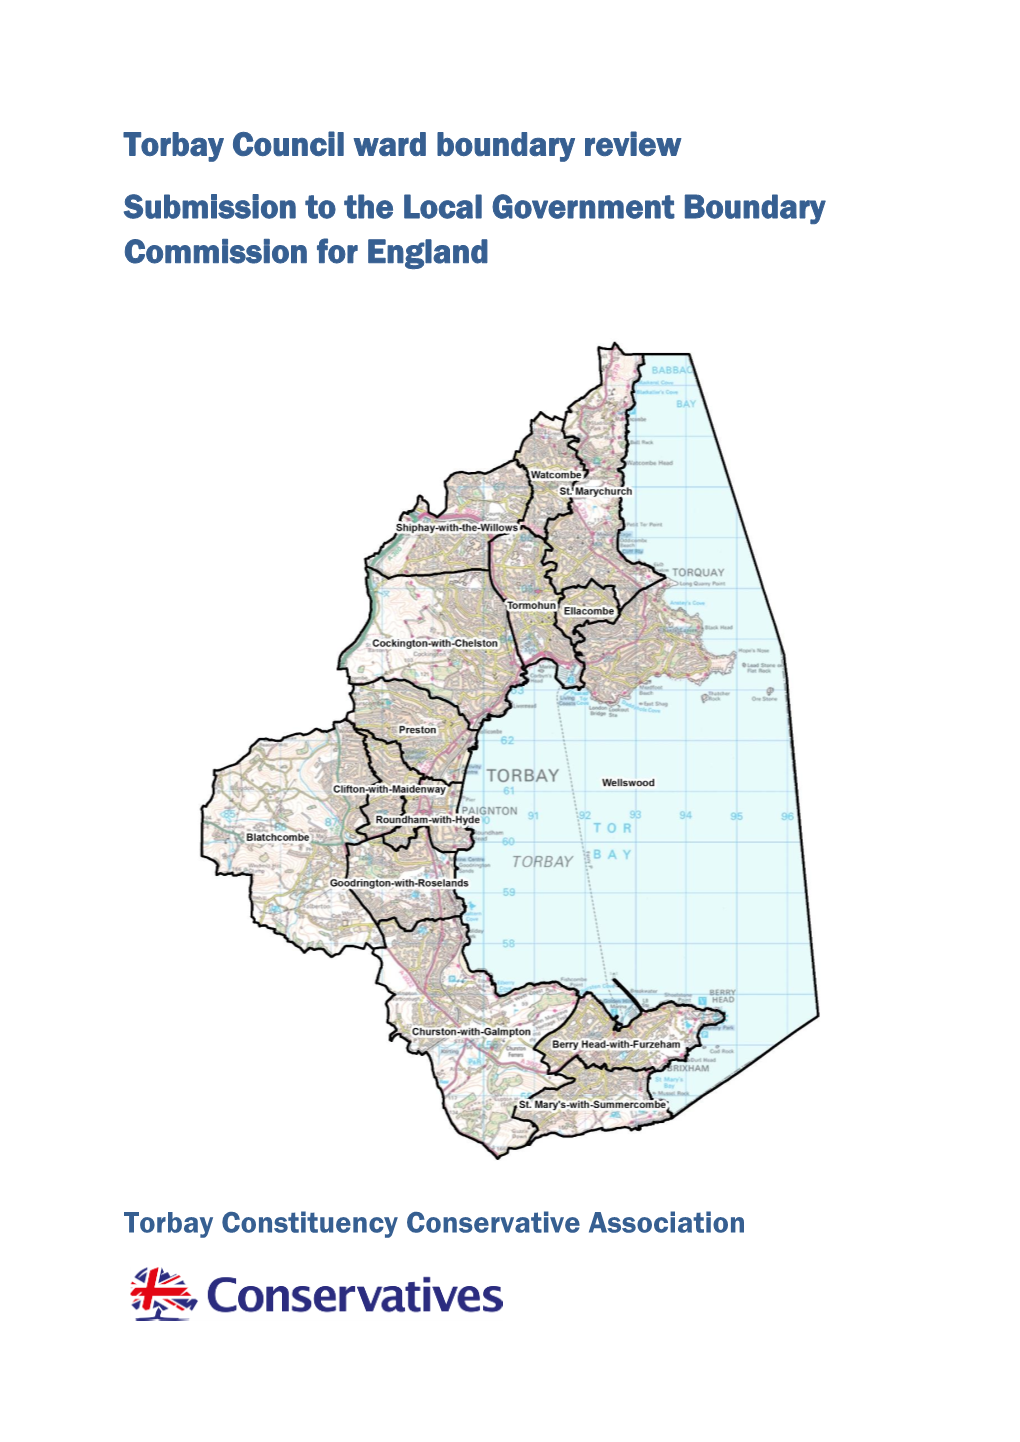 Torbay Council Ward Boundary Review Submission to the Local